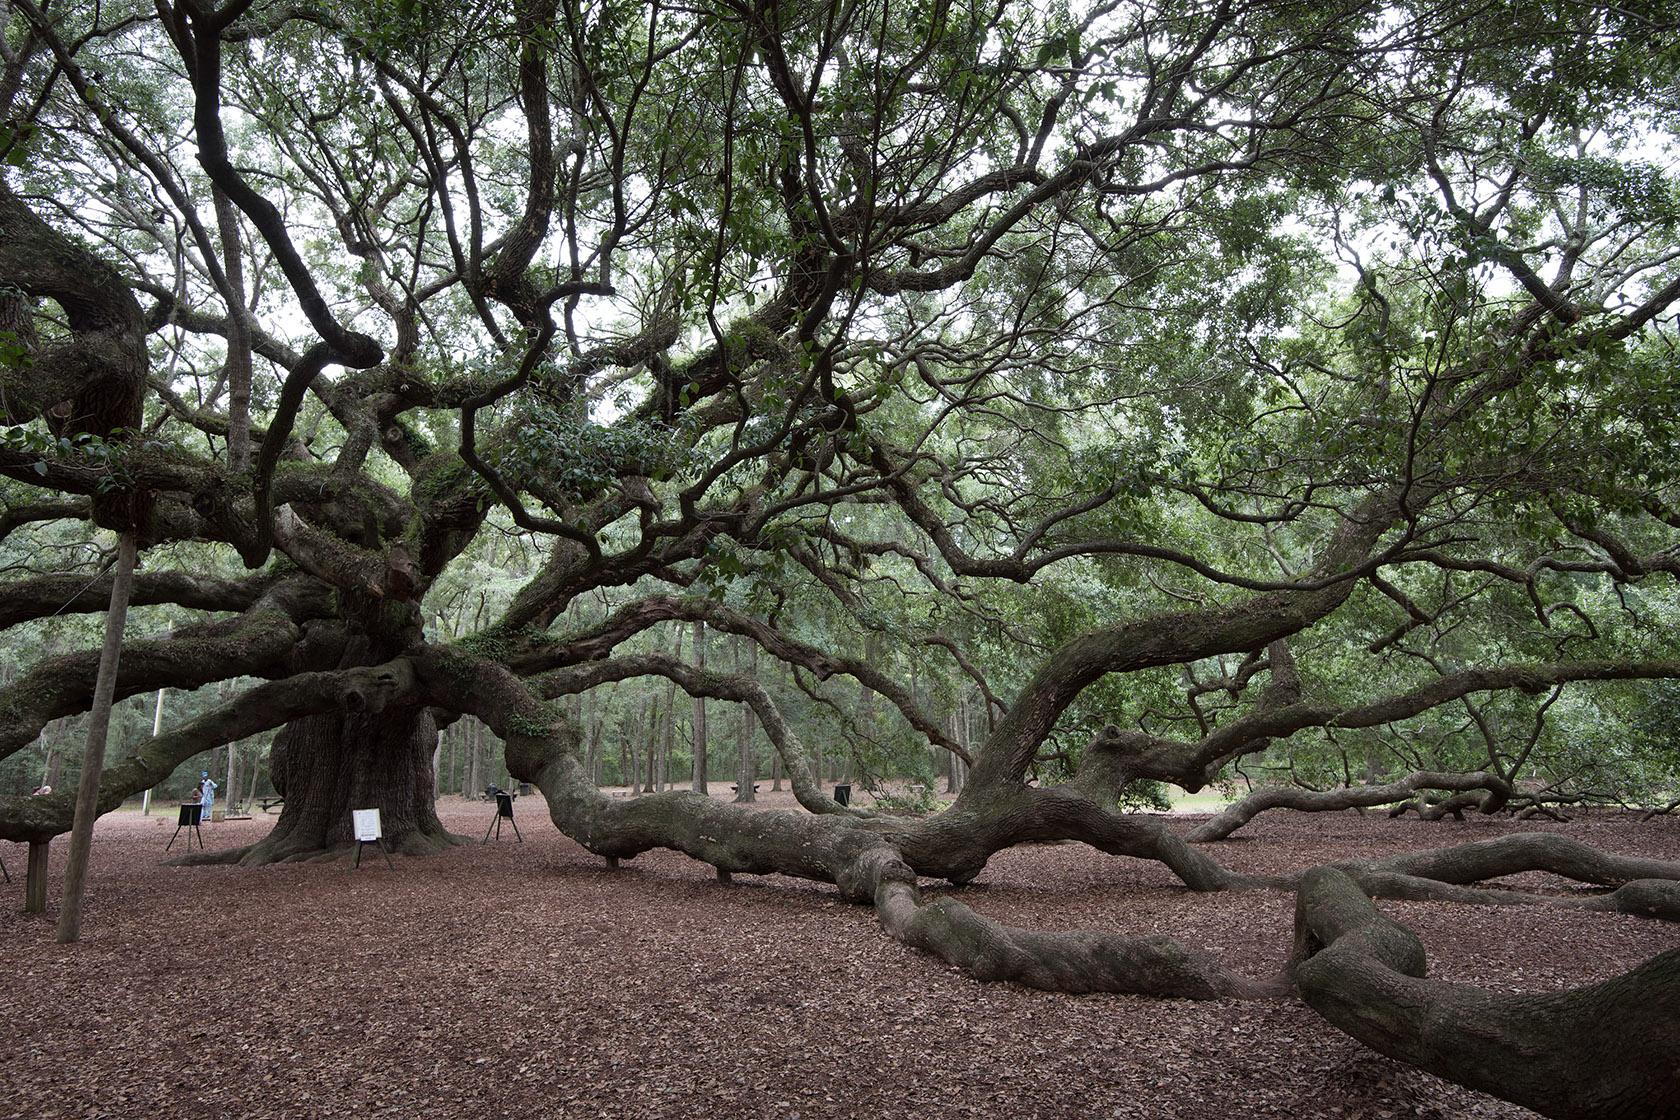 Angel Oak, raw image file converted to JPEG without adjutsments except size